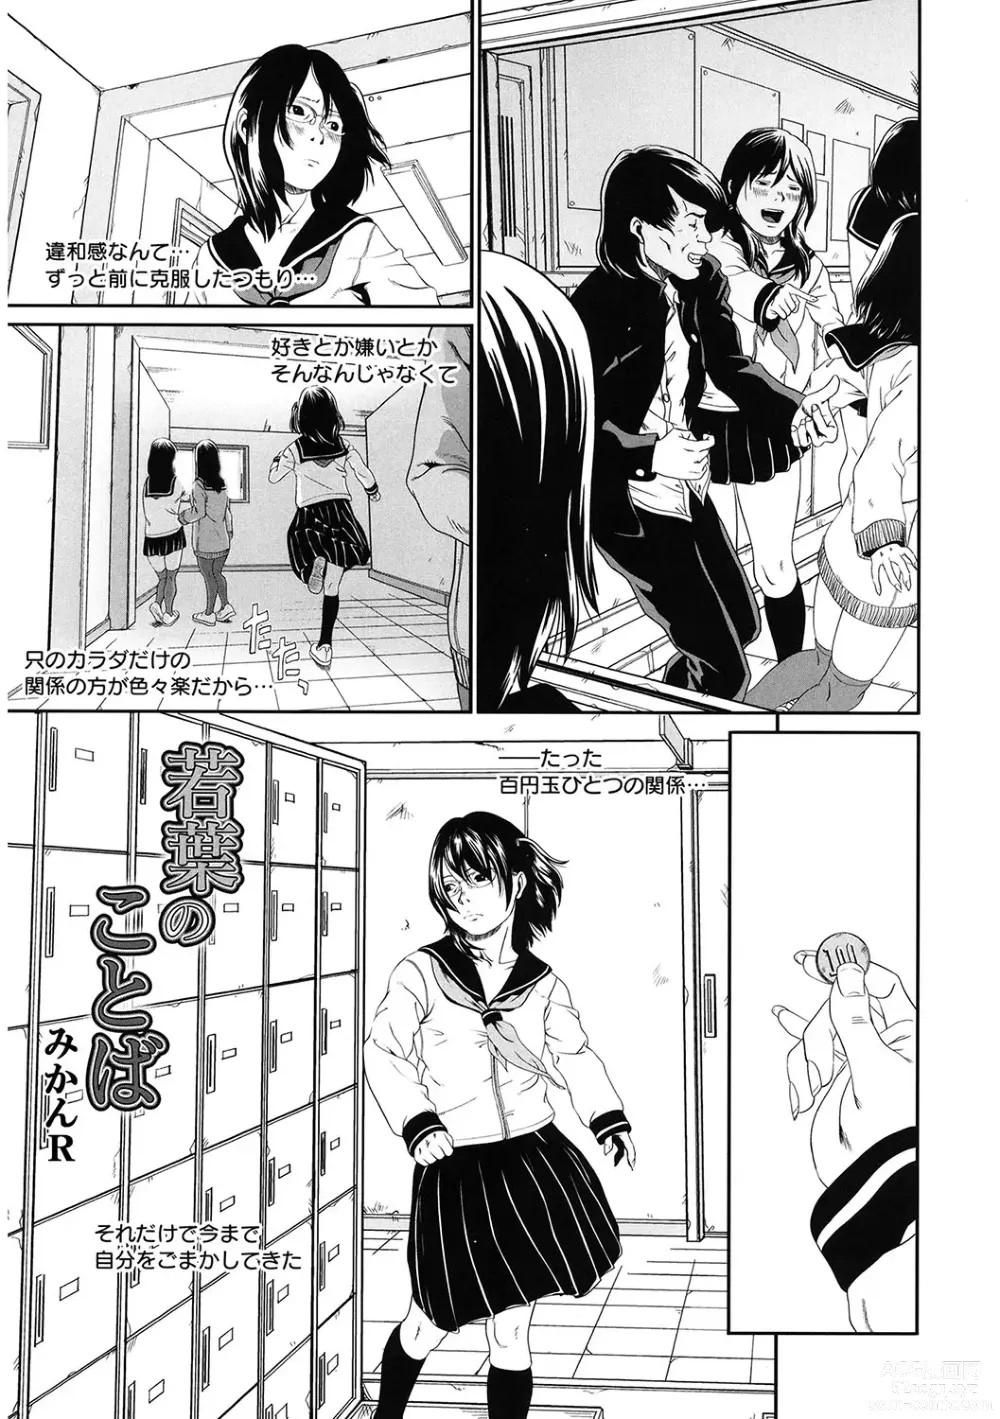 Page 158 of manga LQ -Little Queen- Vol. 54